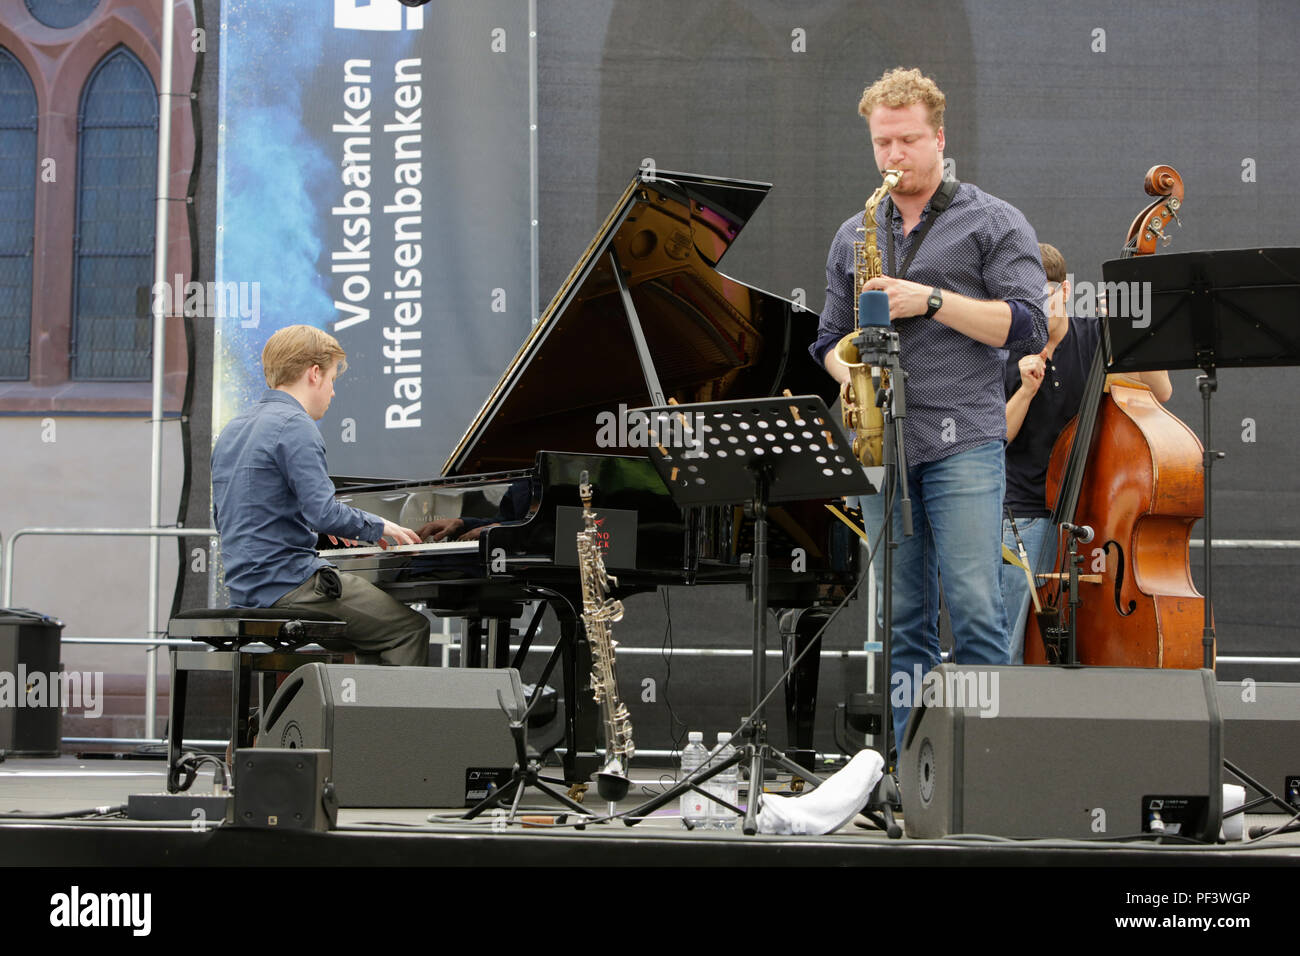 Worms, Germany. 18th Aug, 2018. Pianist Volker Engelbert, saxophonist Bastian Stein and bassist Arne Huber from the Volker Engelberth Quintett perform live on stage at the 2018 Jazz & Joy Festival in Worms in Germany. Credit: Michael Debets/Pacific Press/Alamy Live News Stock Photo